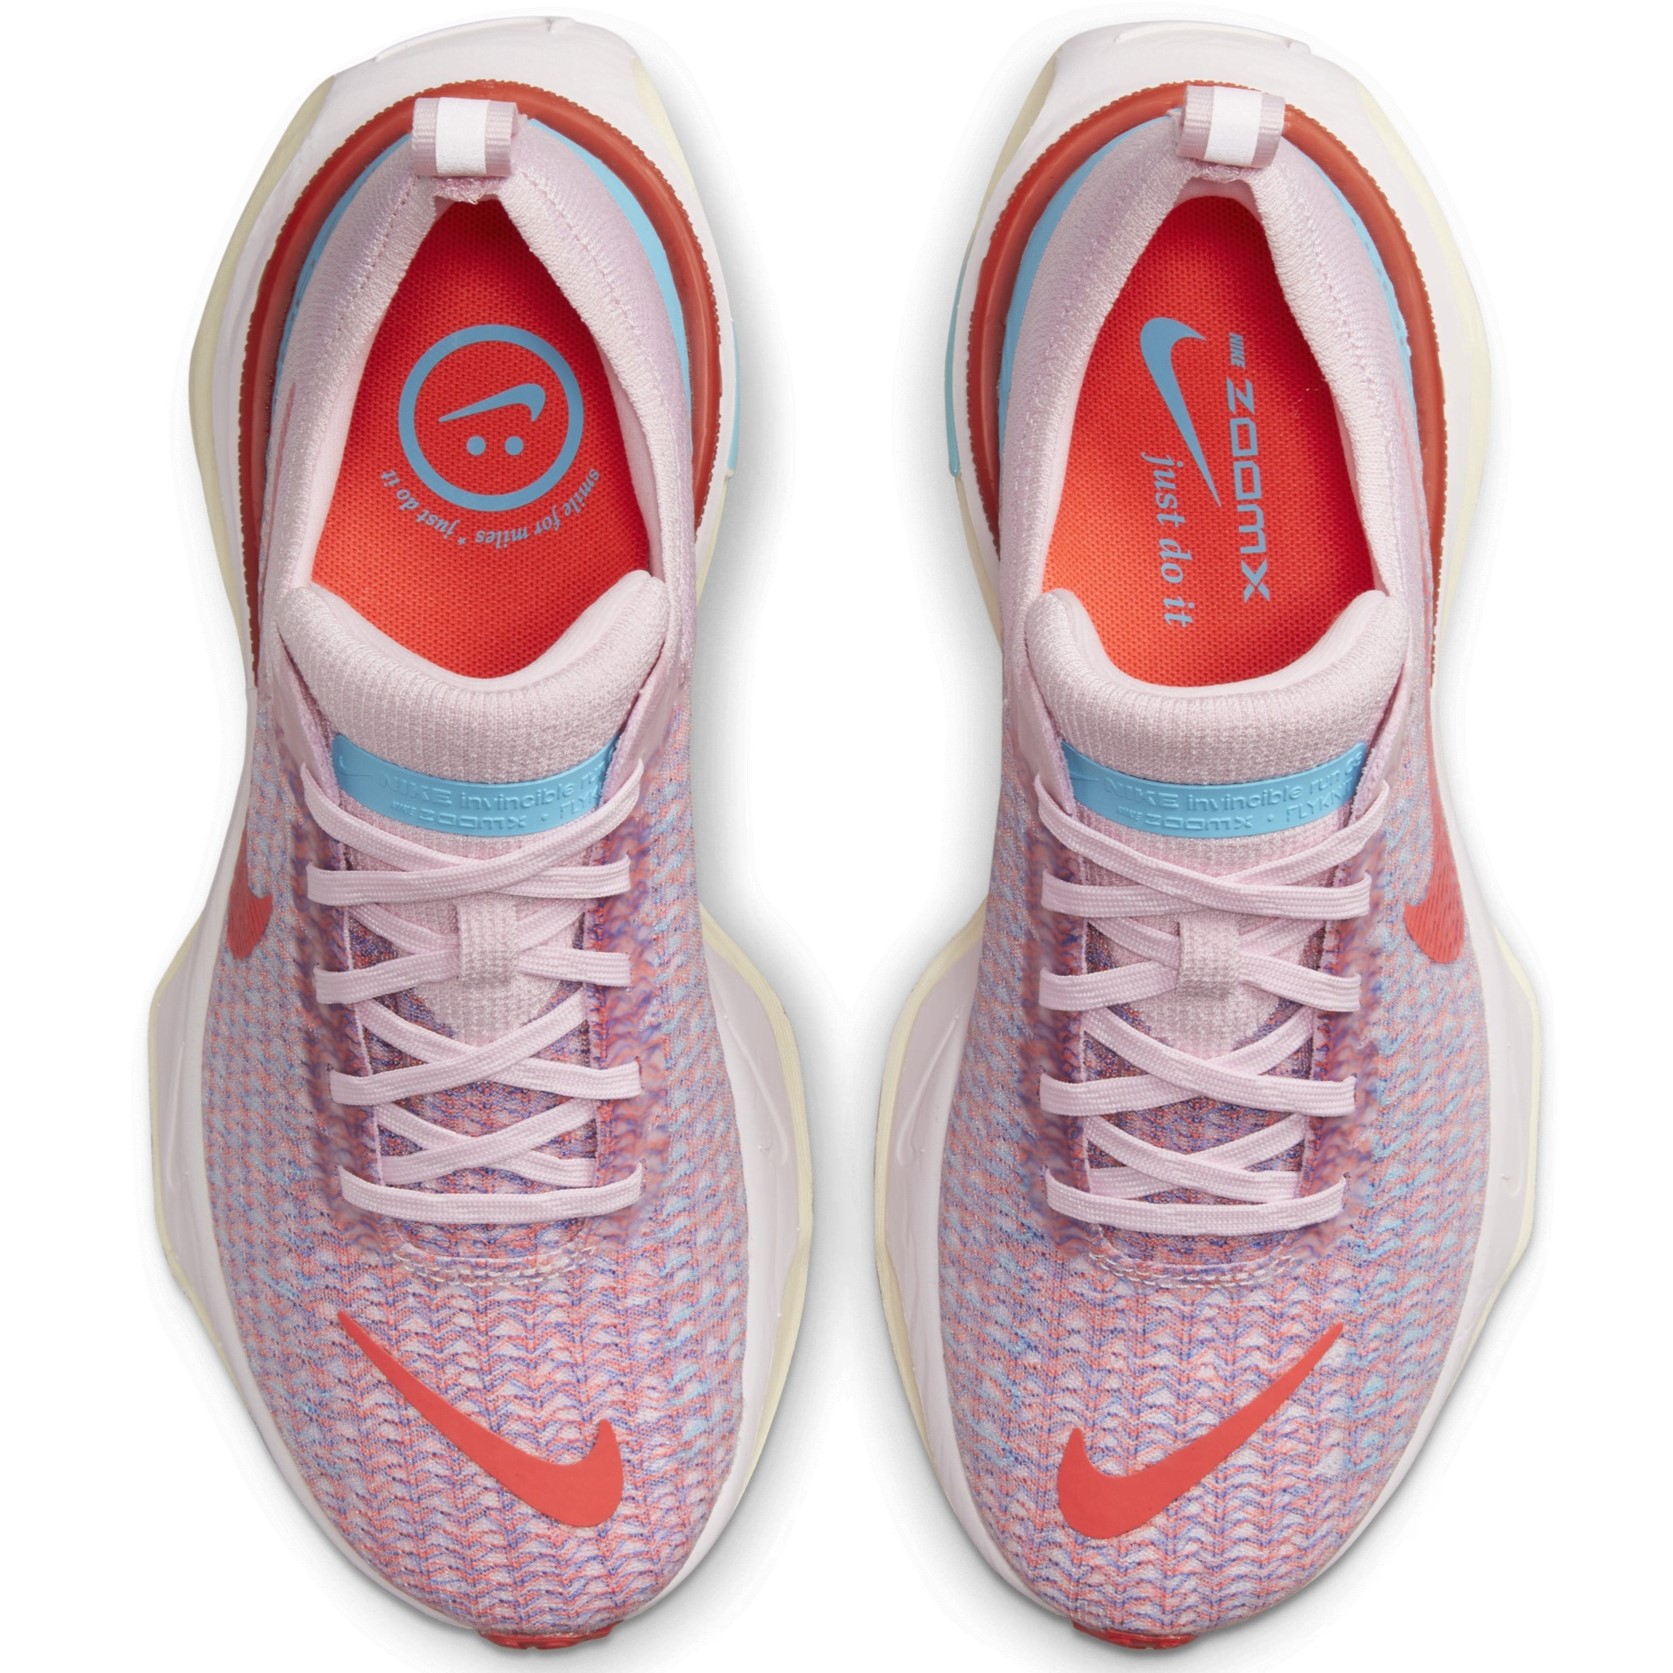 GIÀY CHẠY BỘ NIKE NỮ WOMENS ZOOMX INVINCIBLE 3 ROAD RUNNING SHOES PINK FOAM RACER BLUE DR2660-600 8